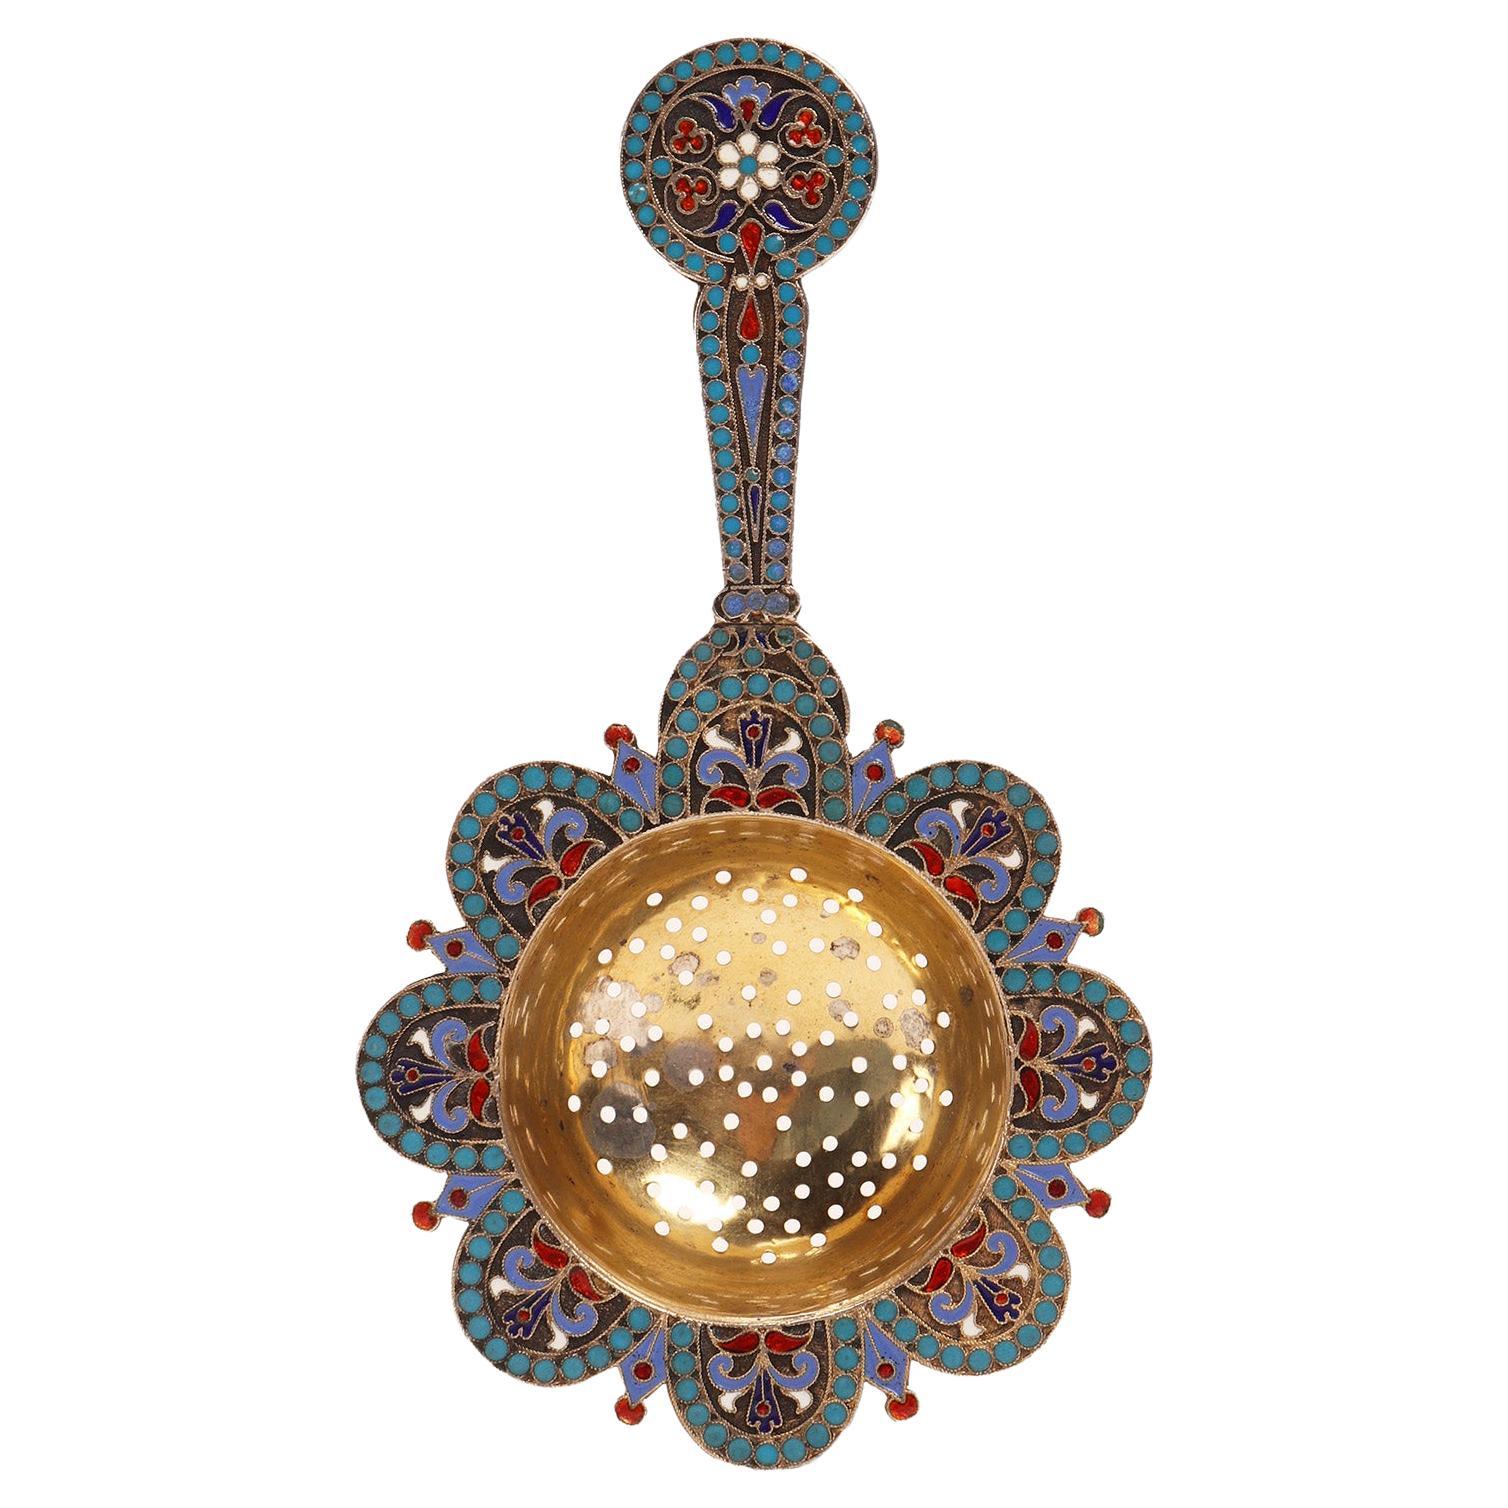 Silver and Enamels Tea Strainer, Moscow, 1884